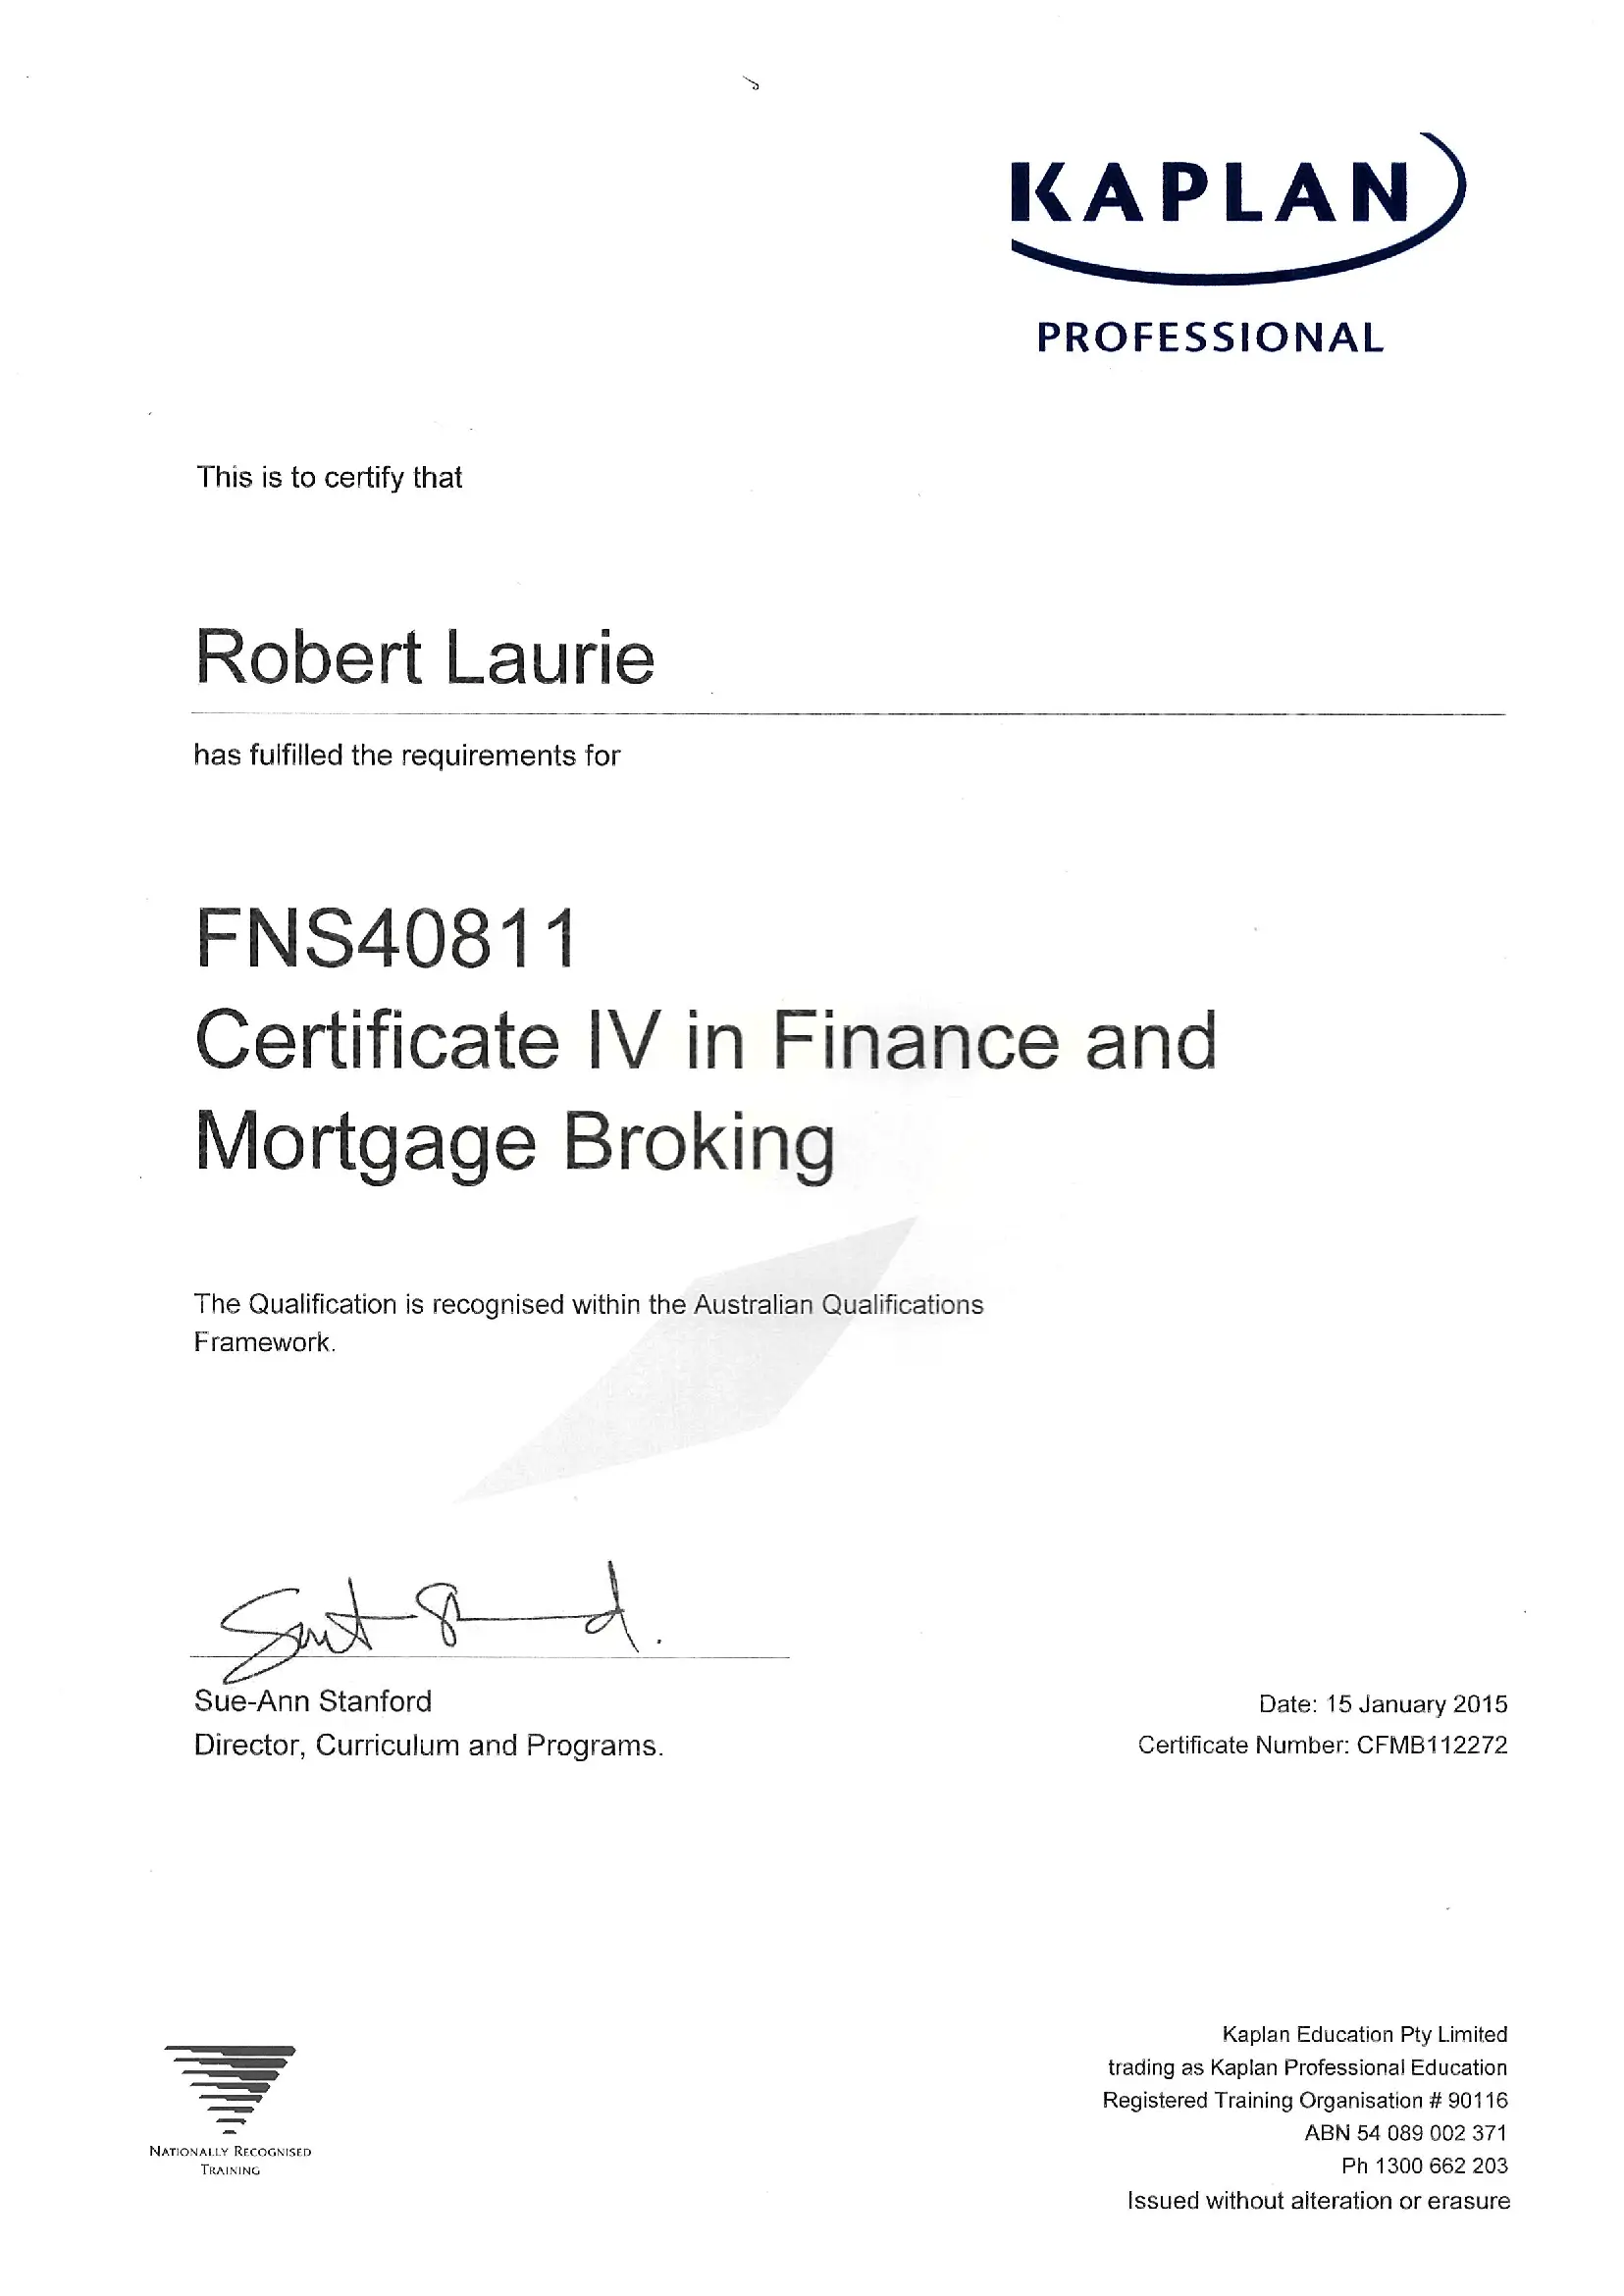 Certificate-IV-in-Finance-and-Mortgage-Broking-Certificate